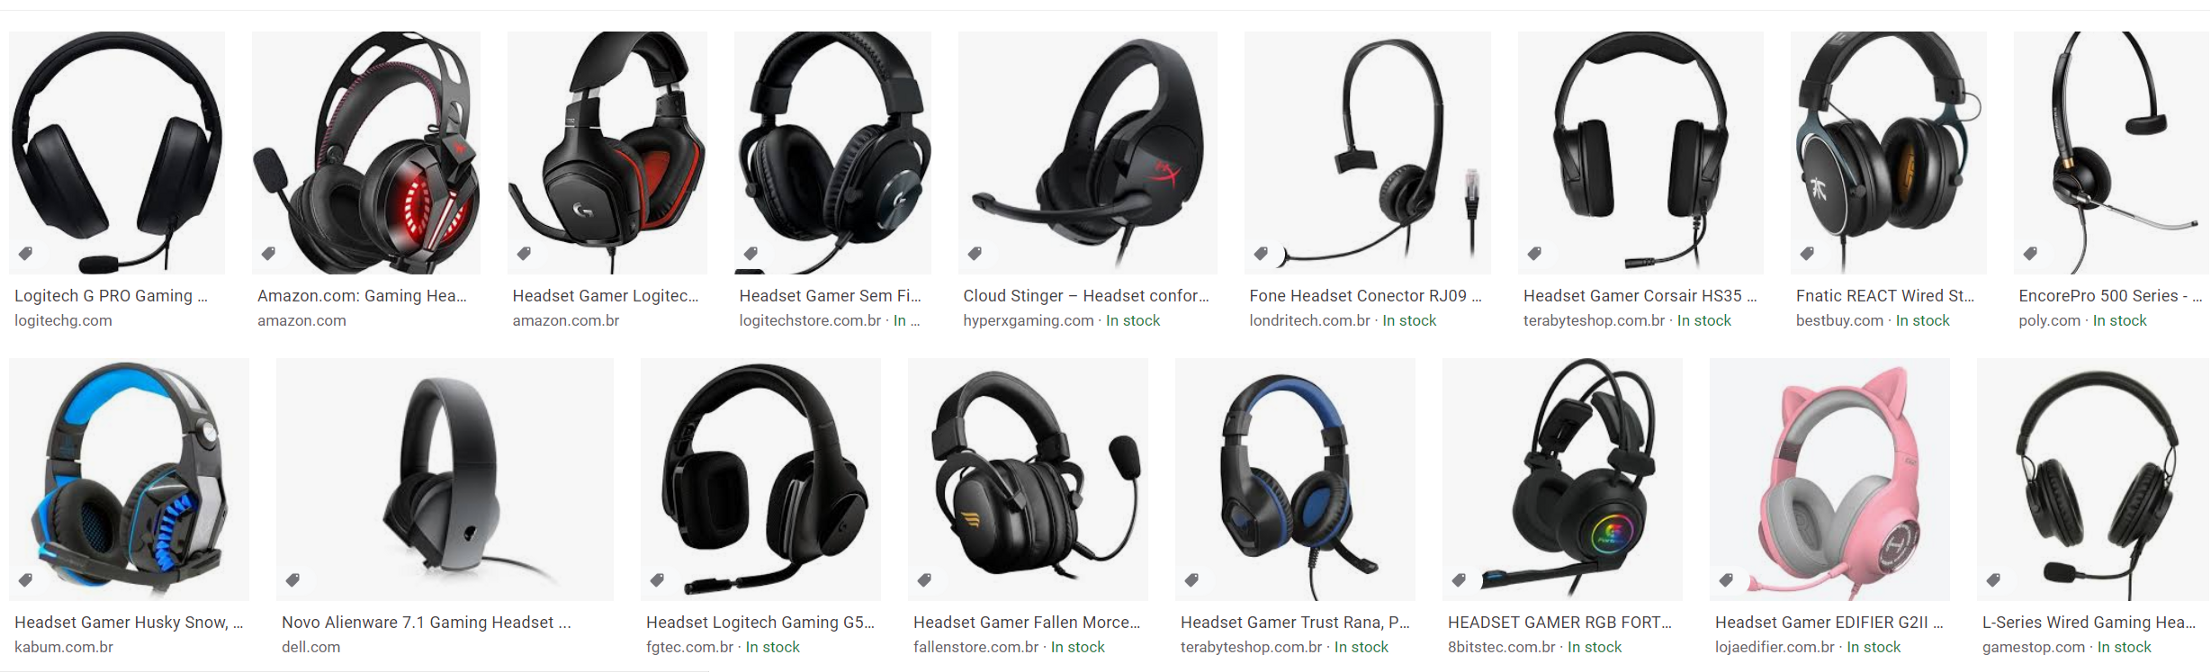 First two rows of searching “Headset” at Google Images